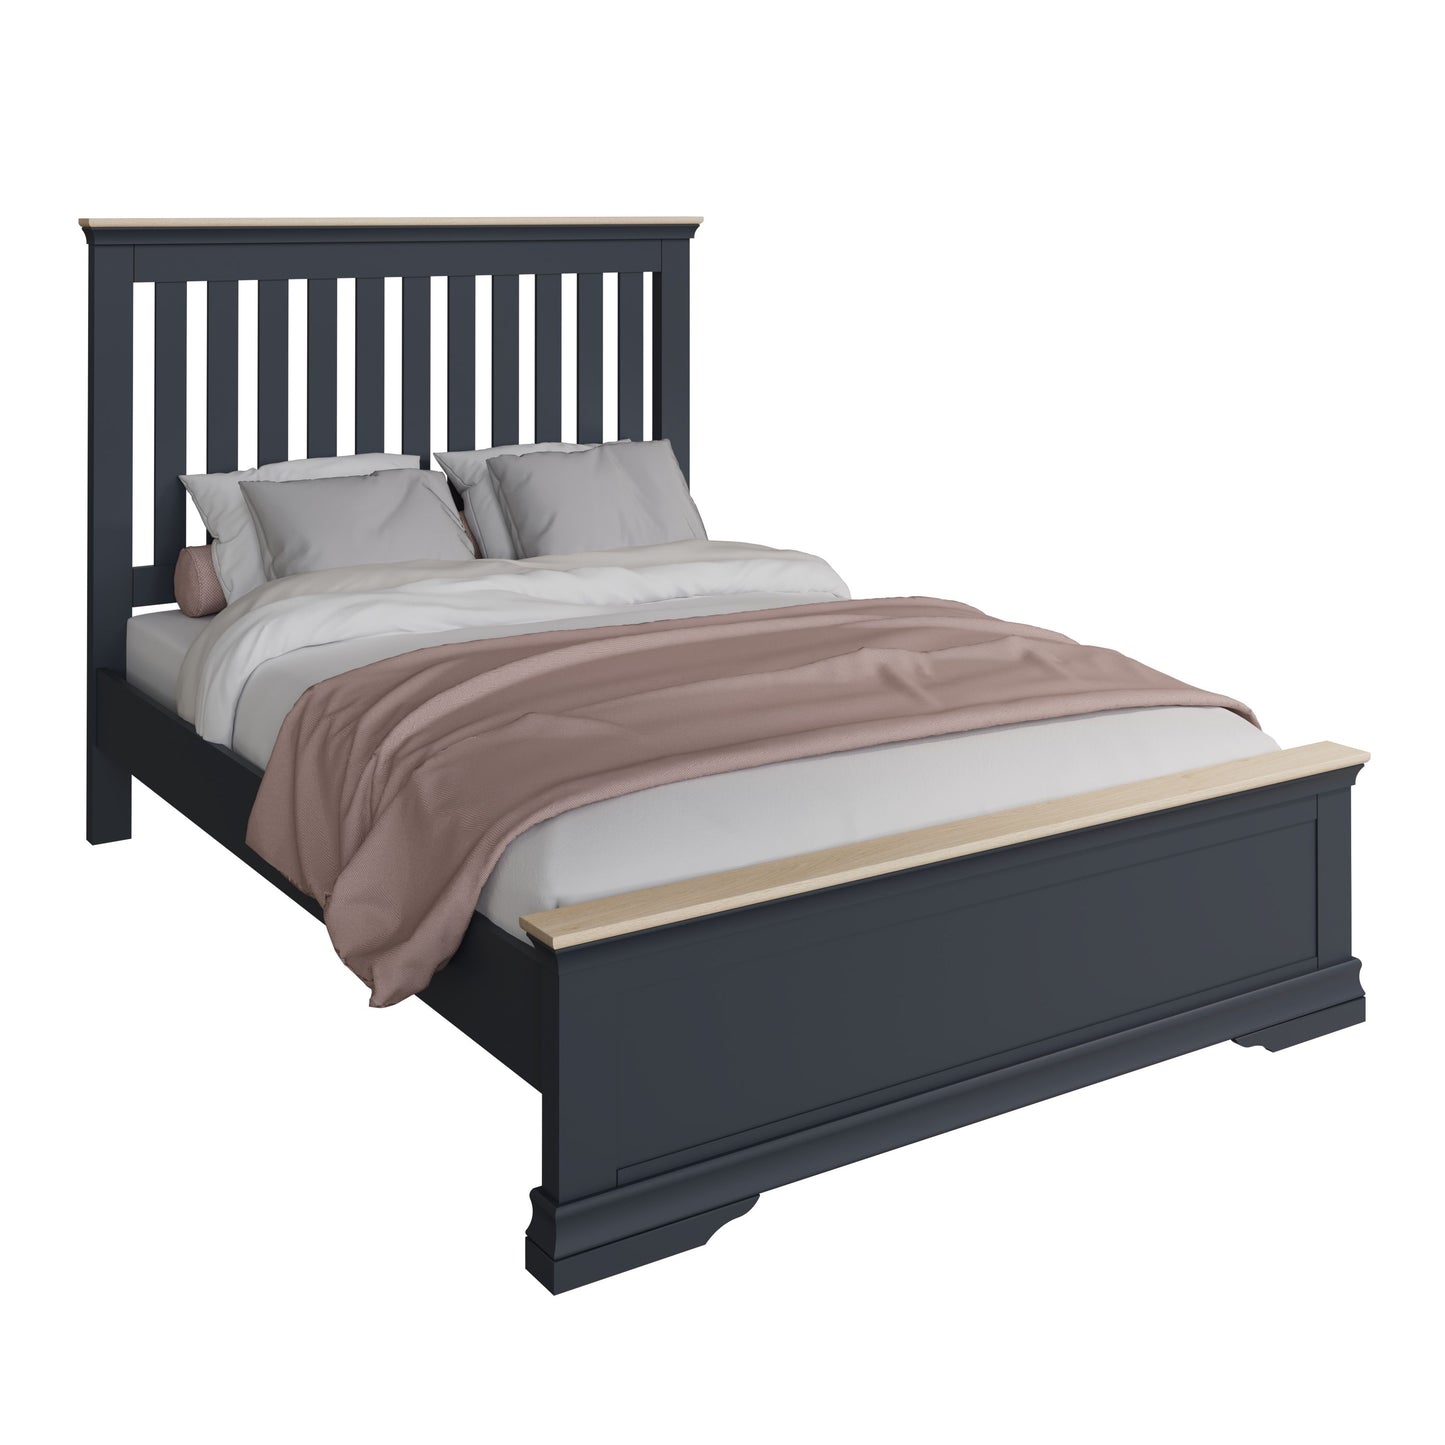 SWO Midnight Grey Wooden Bed Frame